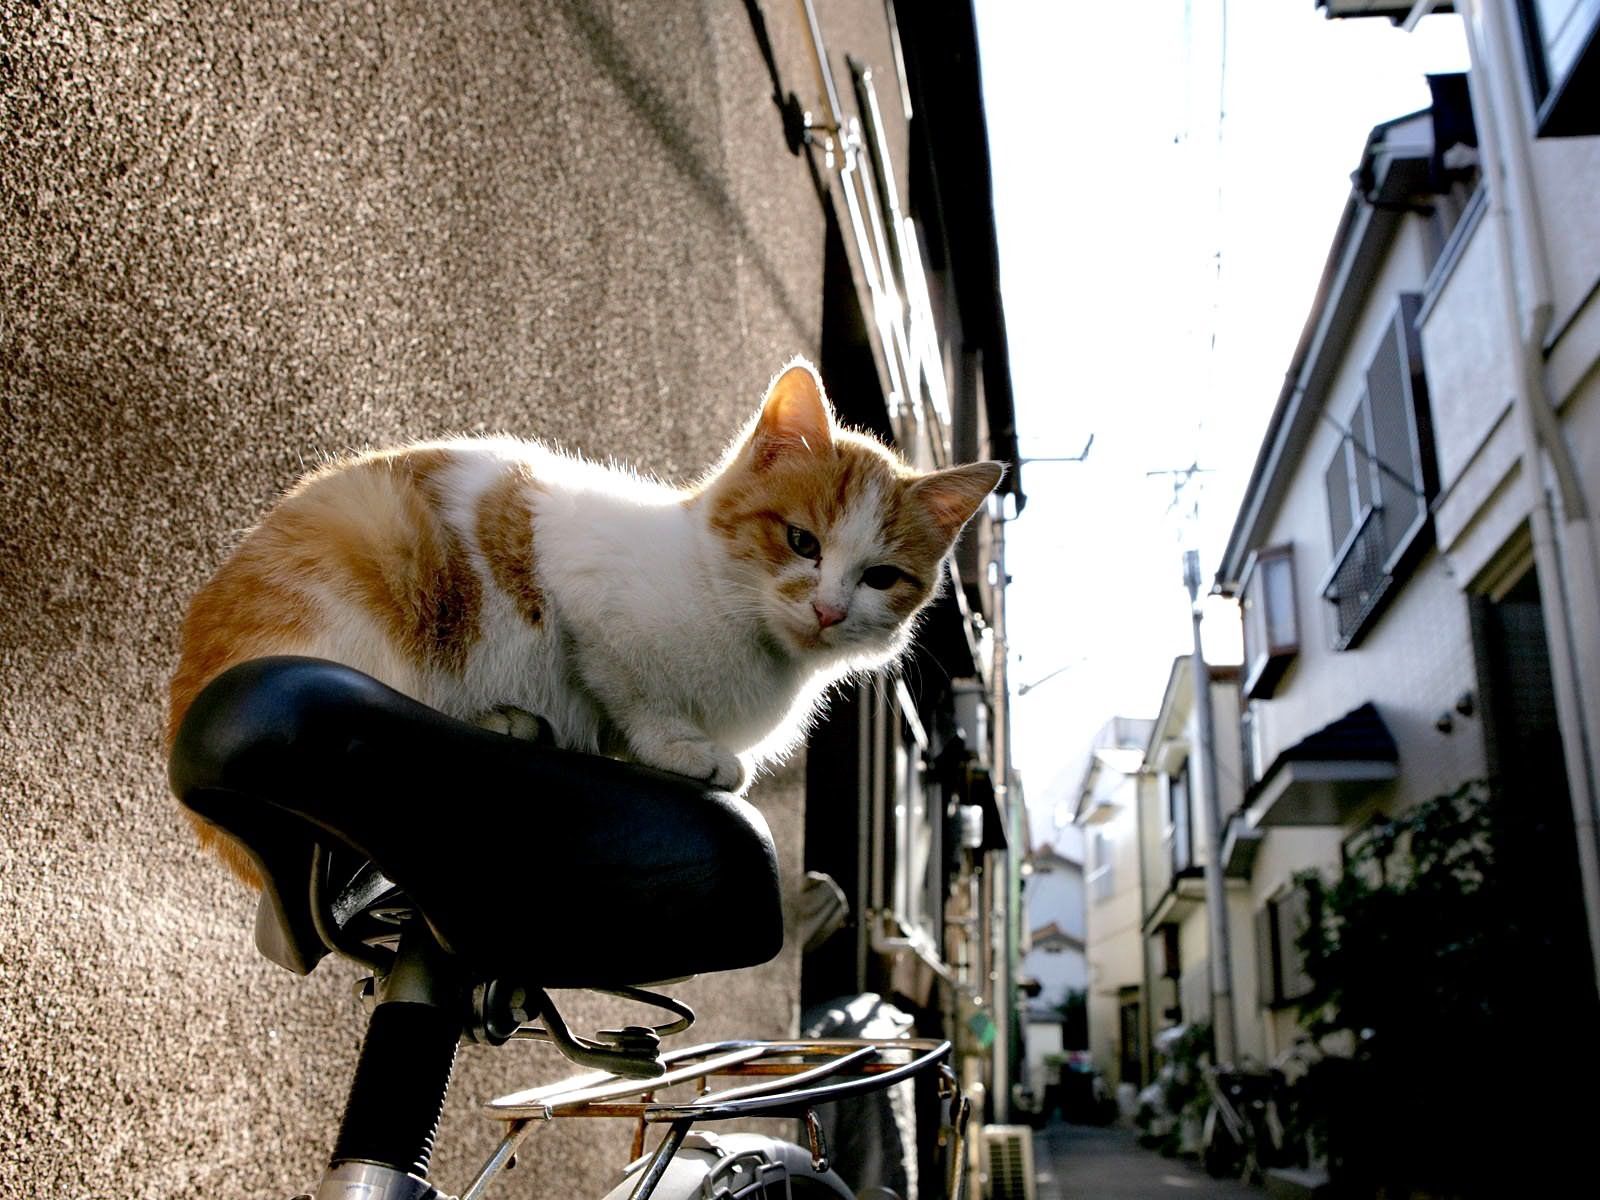 52737 3840x2160 PC pictures for free, download cat, animals, bicycle, kitten 3840x2160 wallpapers on your desktop